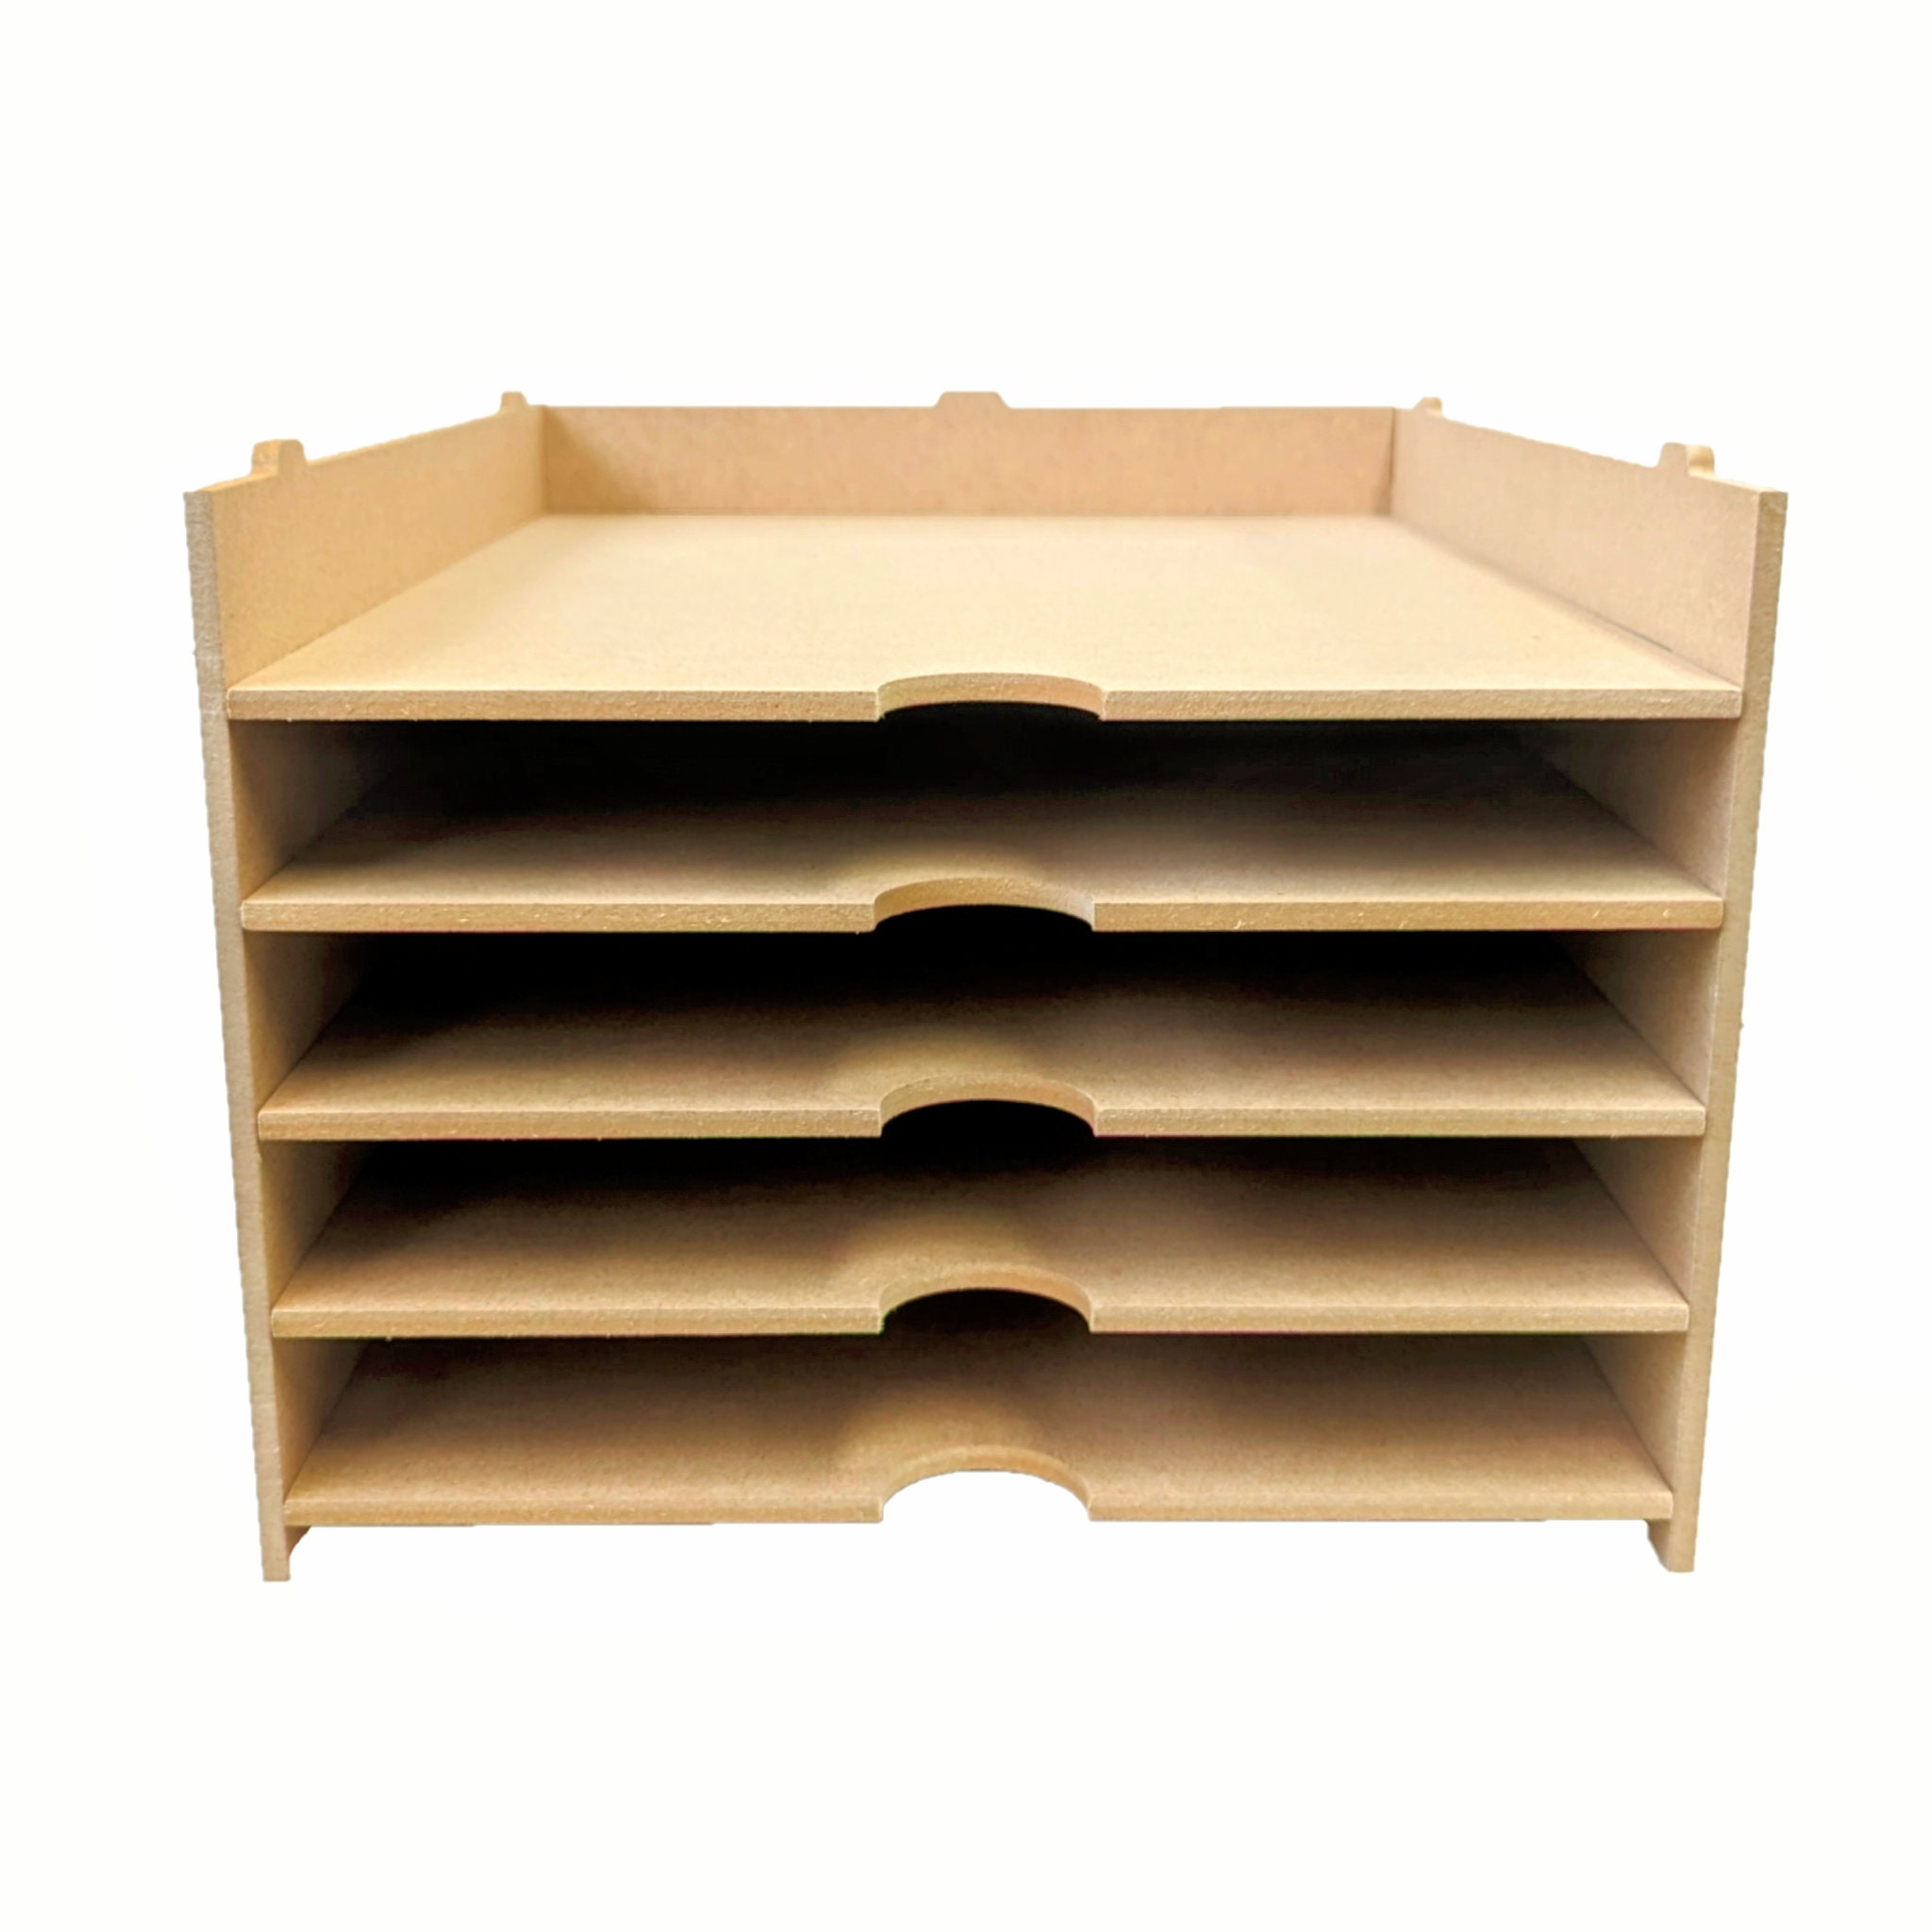 Metal Die Storage Units 3 Sizes Available 5, 10 or 15 Trays Which Holds up  to 30 Magnetic Sheets 